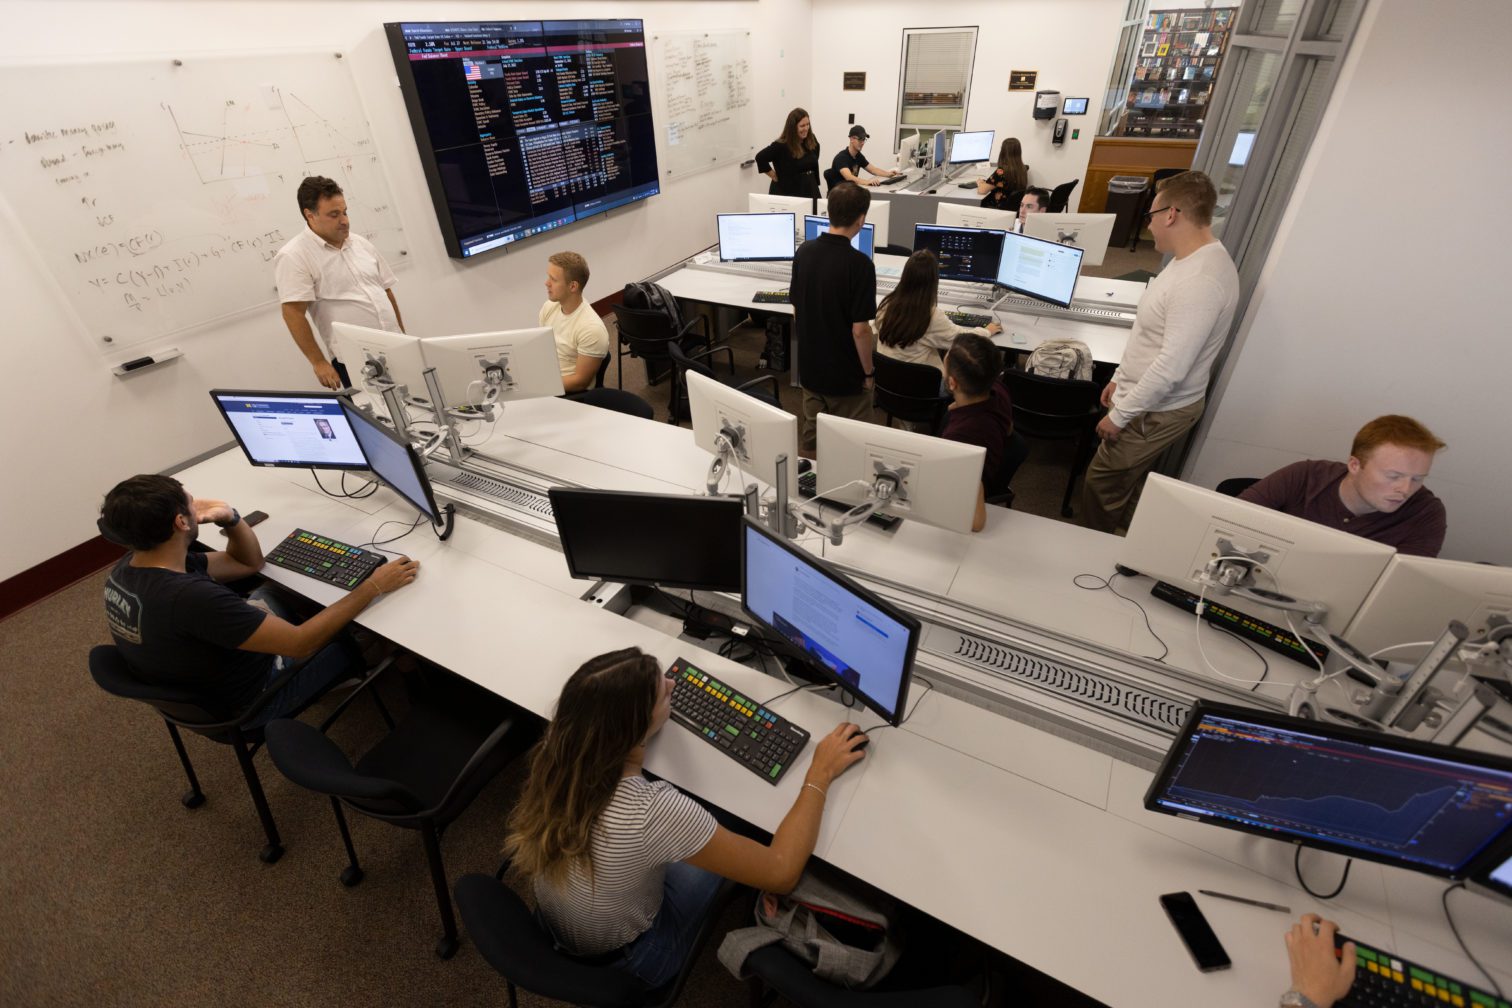 Students in the Bloomberg lab sitting at desks and working on computers.